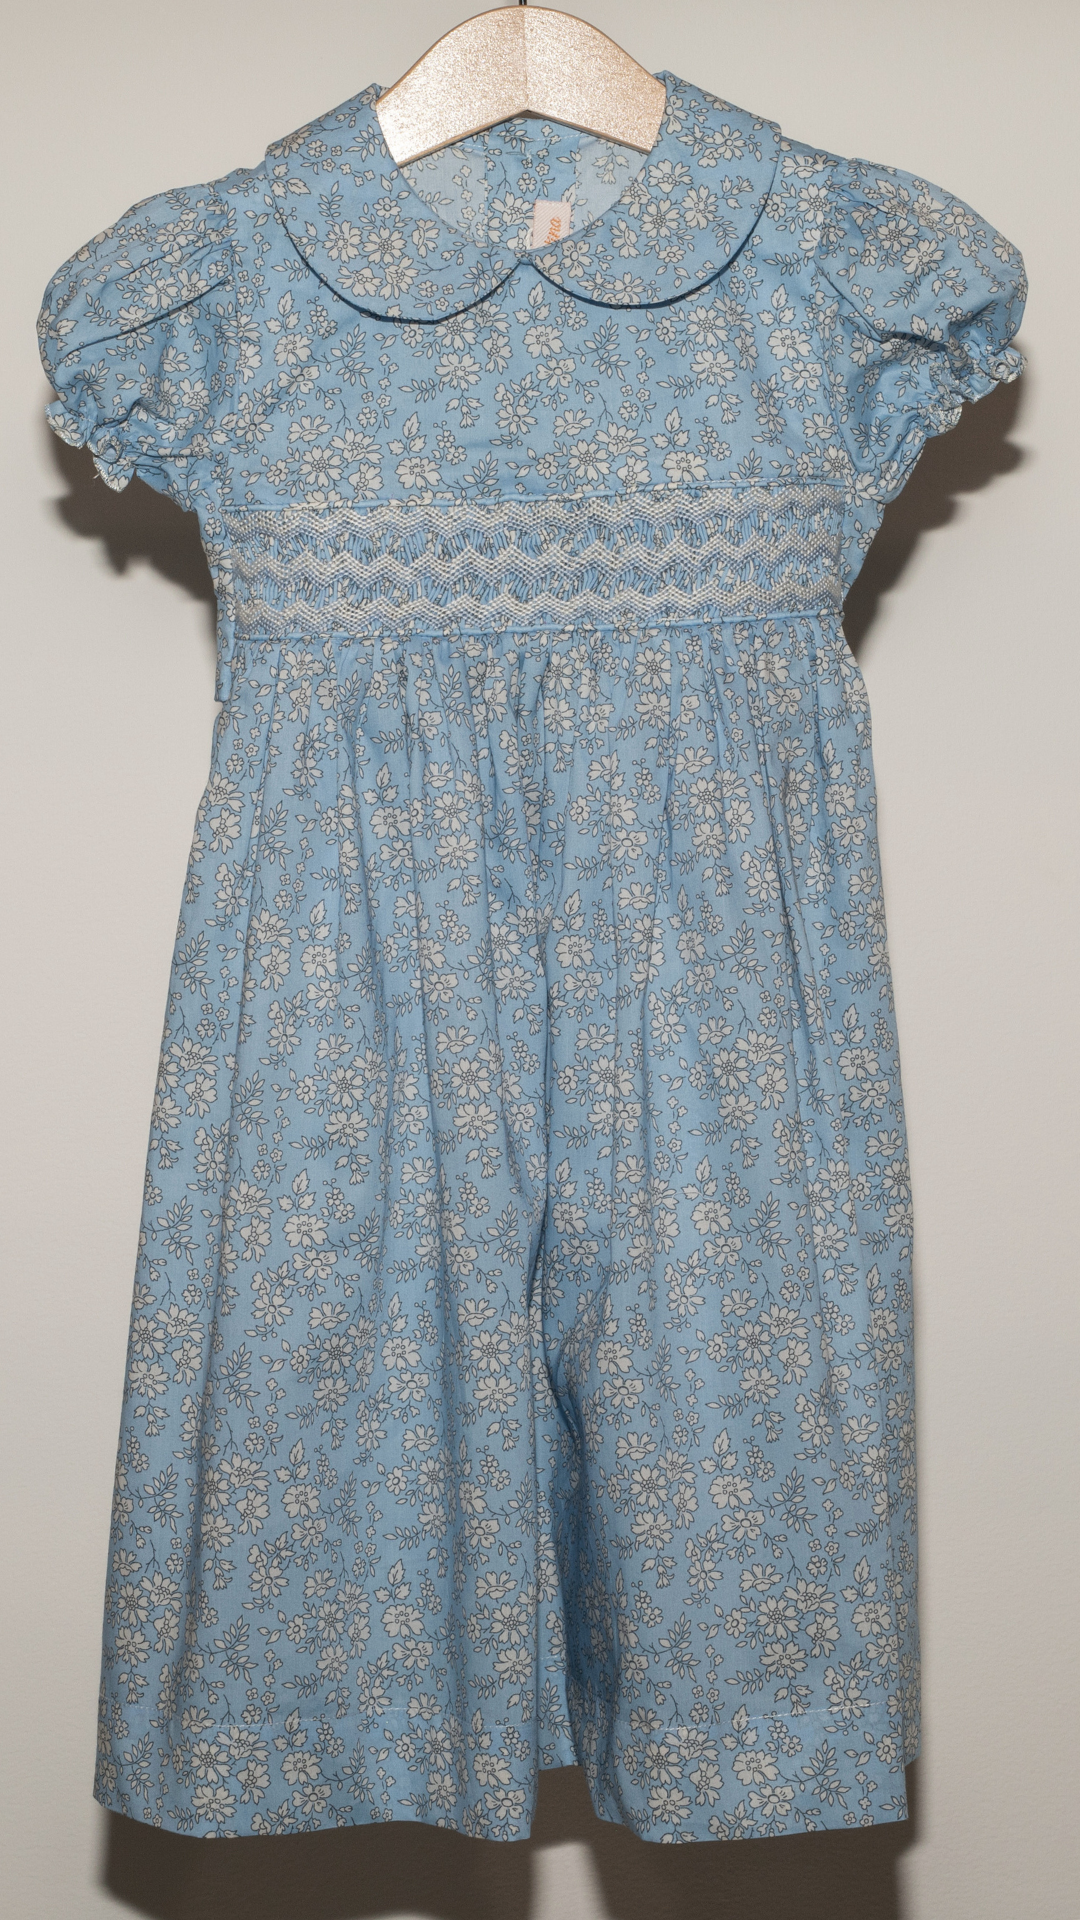 HAND EMBROIDERED DRESS IN LIBERTY LIGHT BLUE FLOWERS